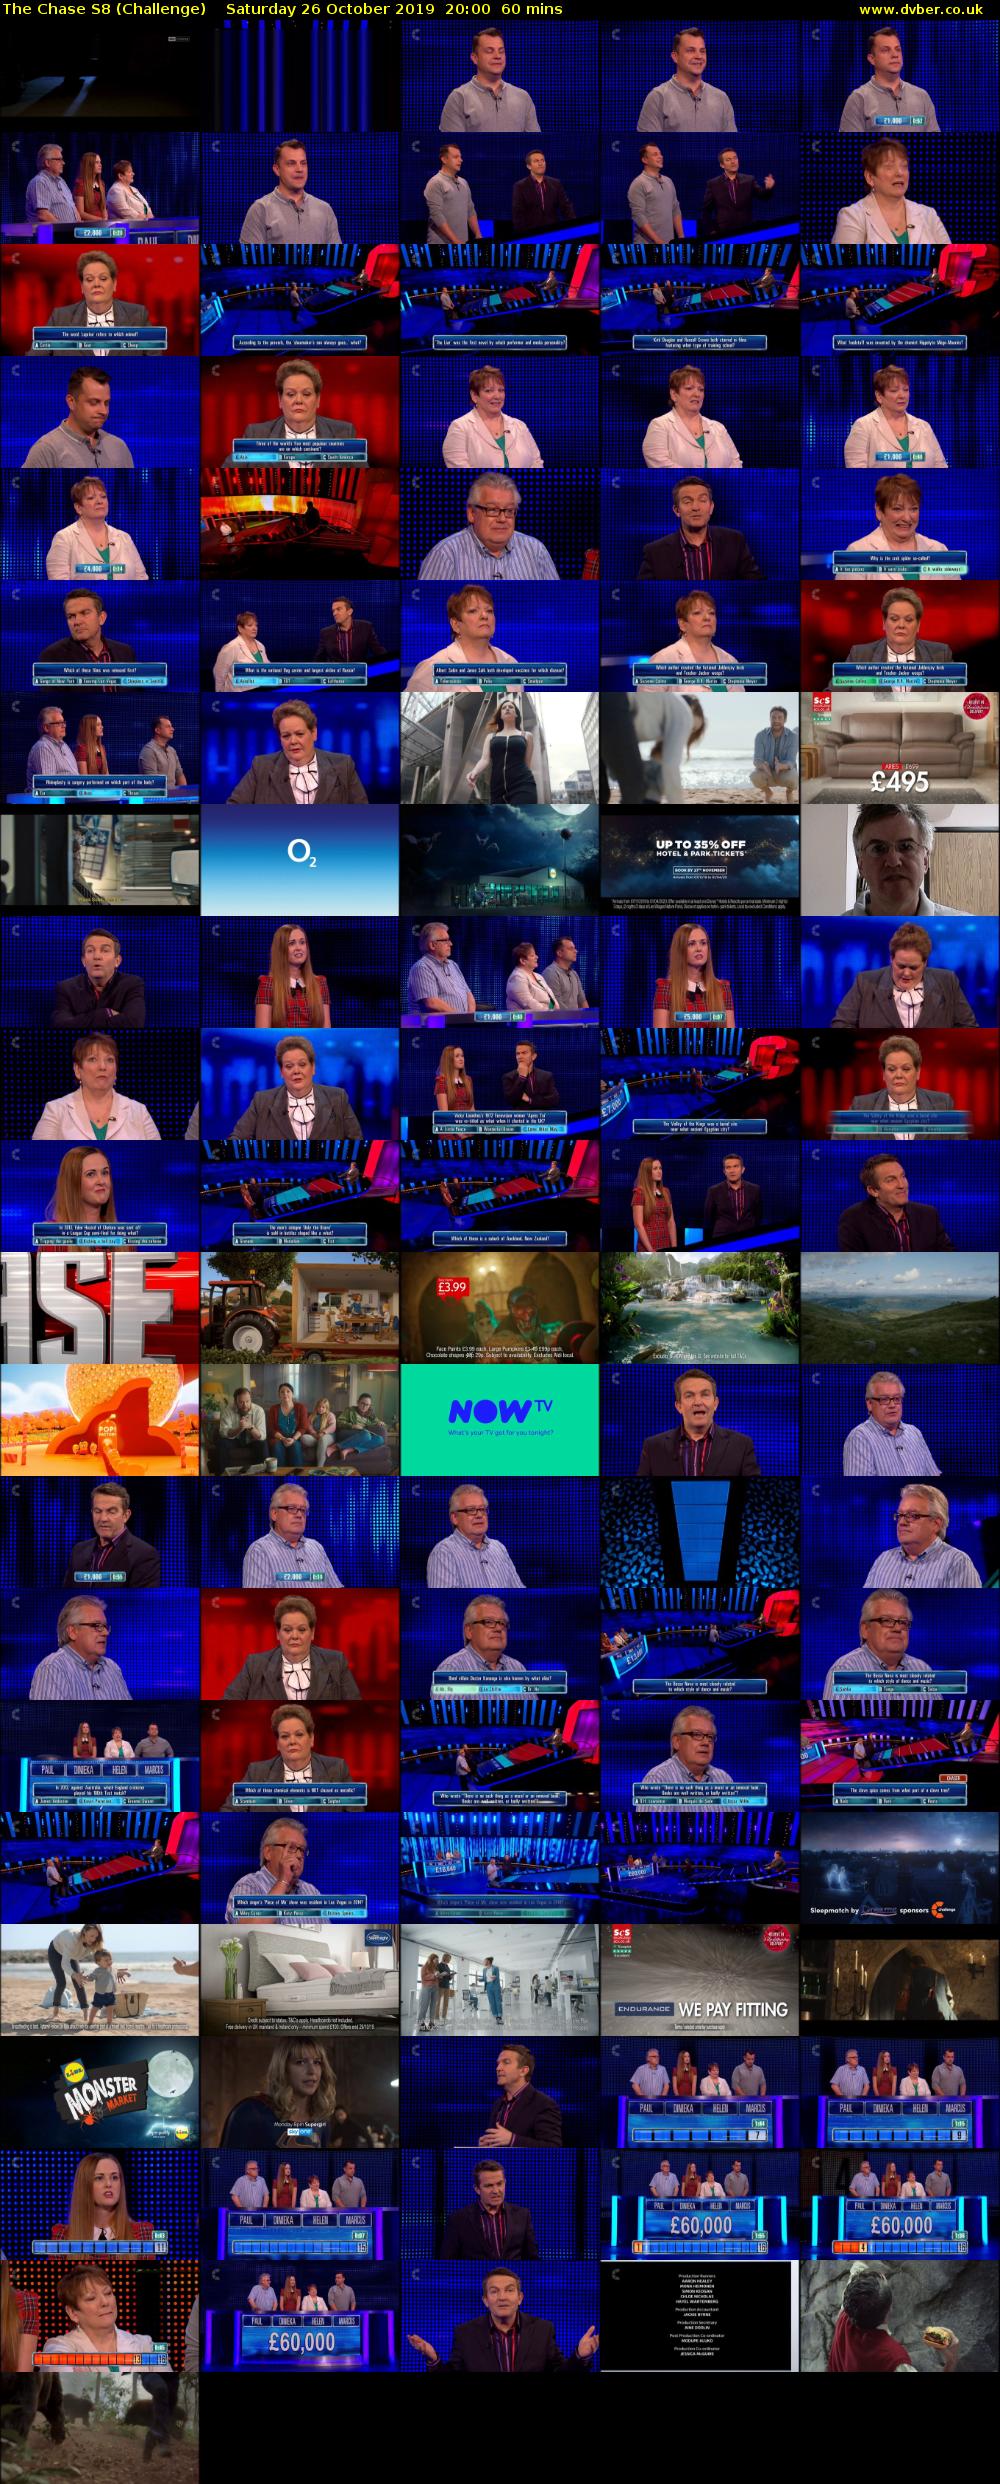 The Chase S8 (Challenge) Saturday 26 October 2019 20:00 - 21:00